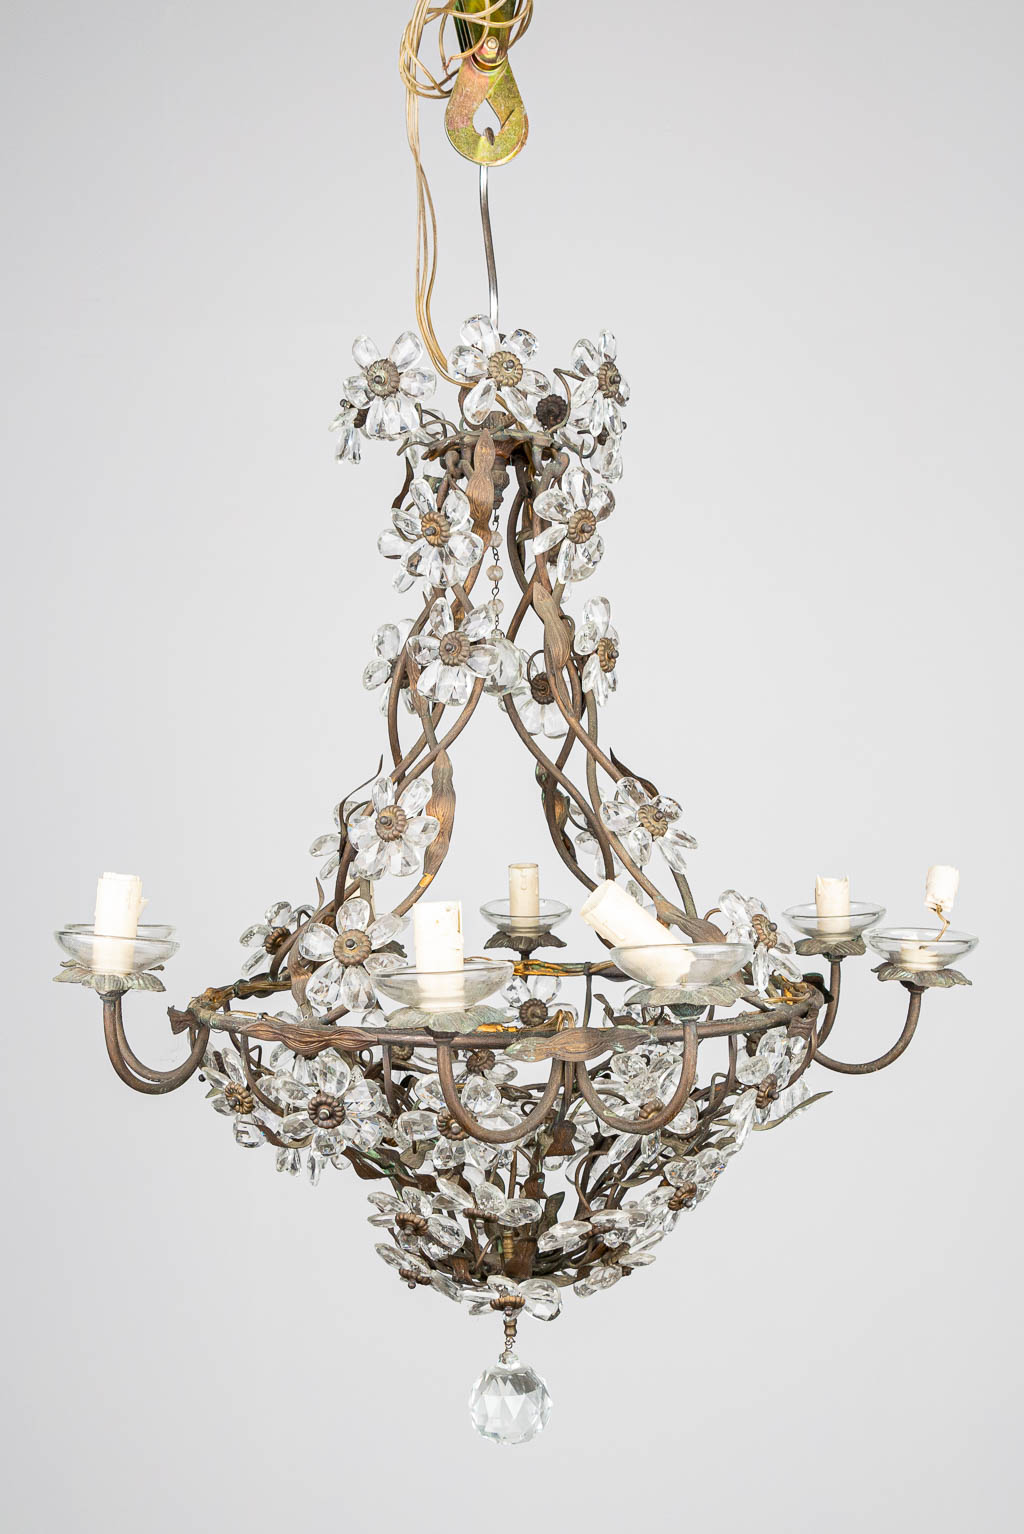 A large chandelier made of metal with glass flowers. 